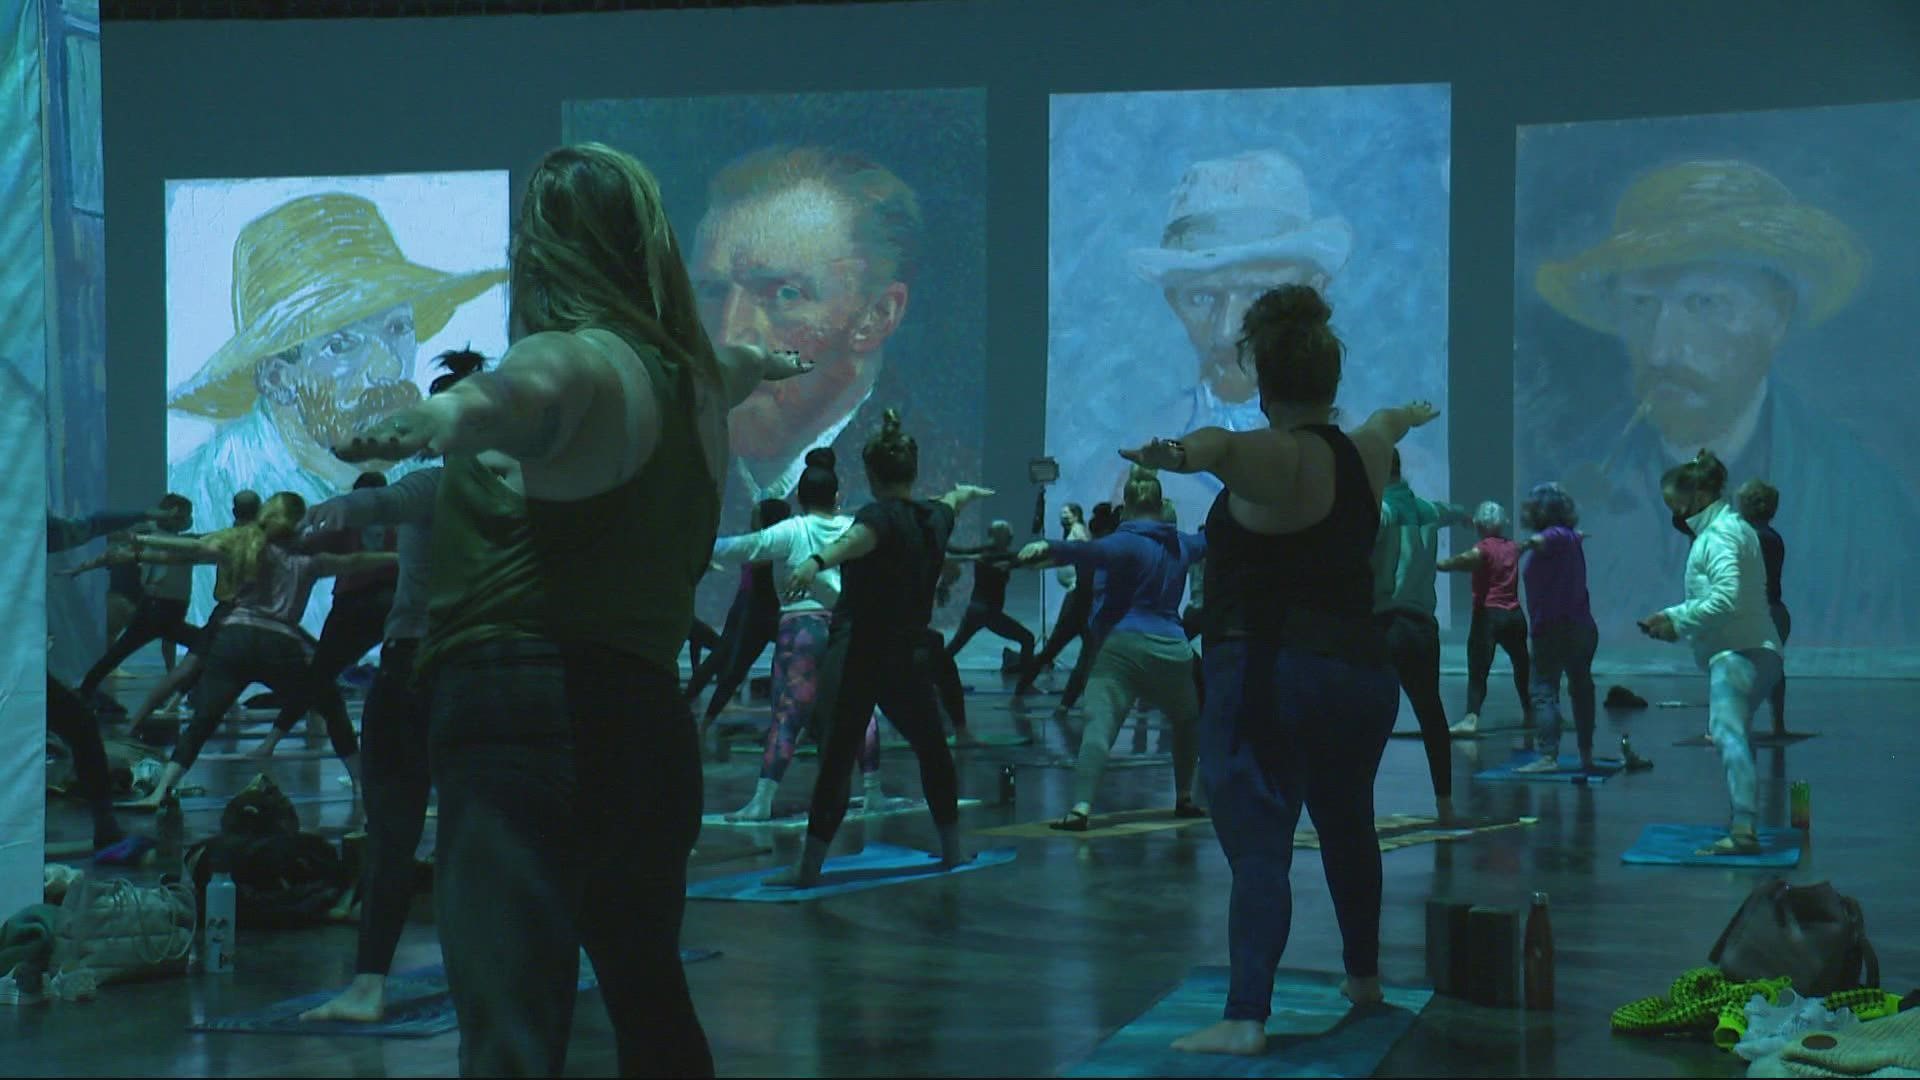 A class at the Oregon Convention Center allows people to practice yoga while viewing Van Gogh's art. It's suitable for people with all levels of experience.